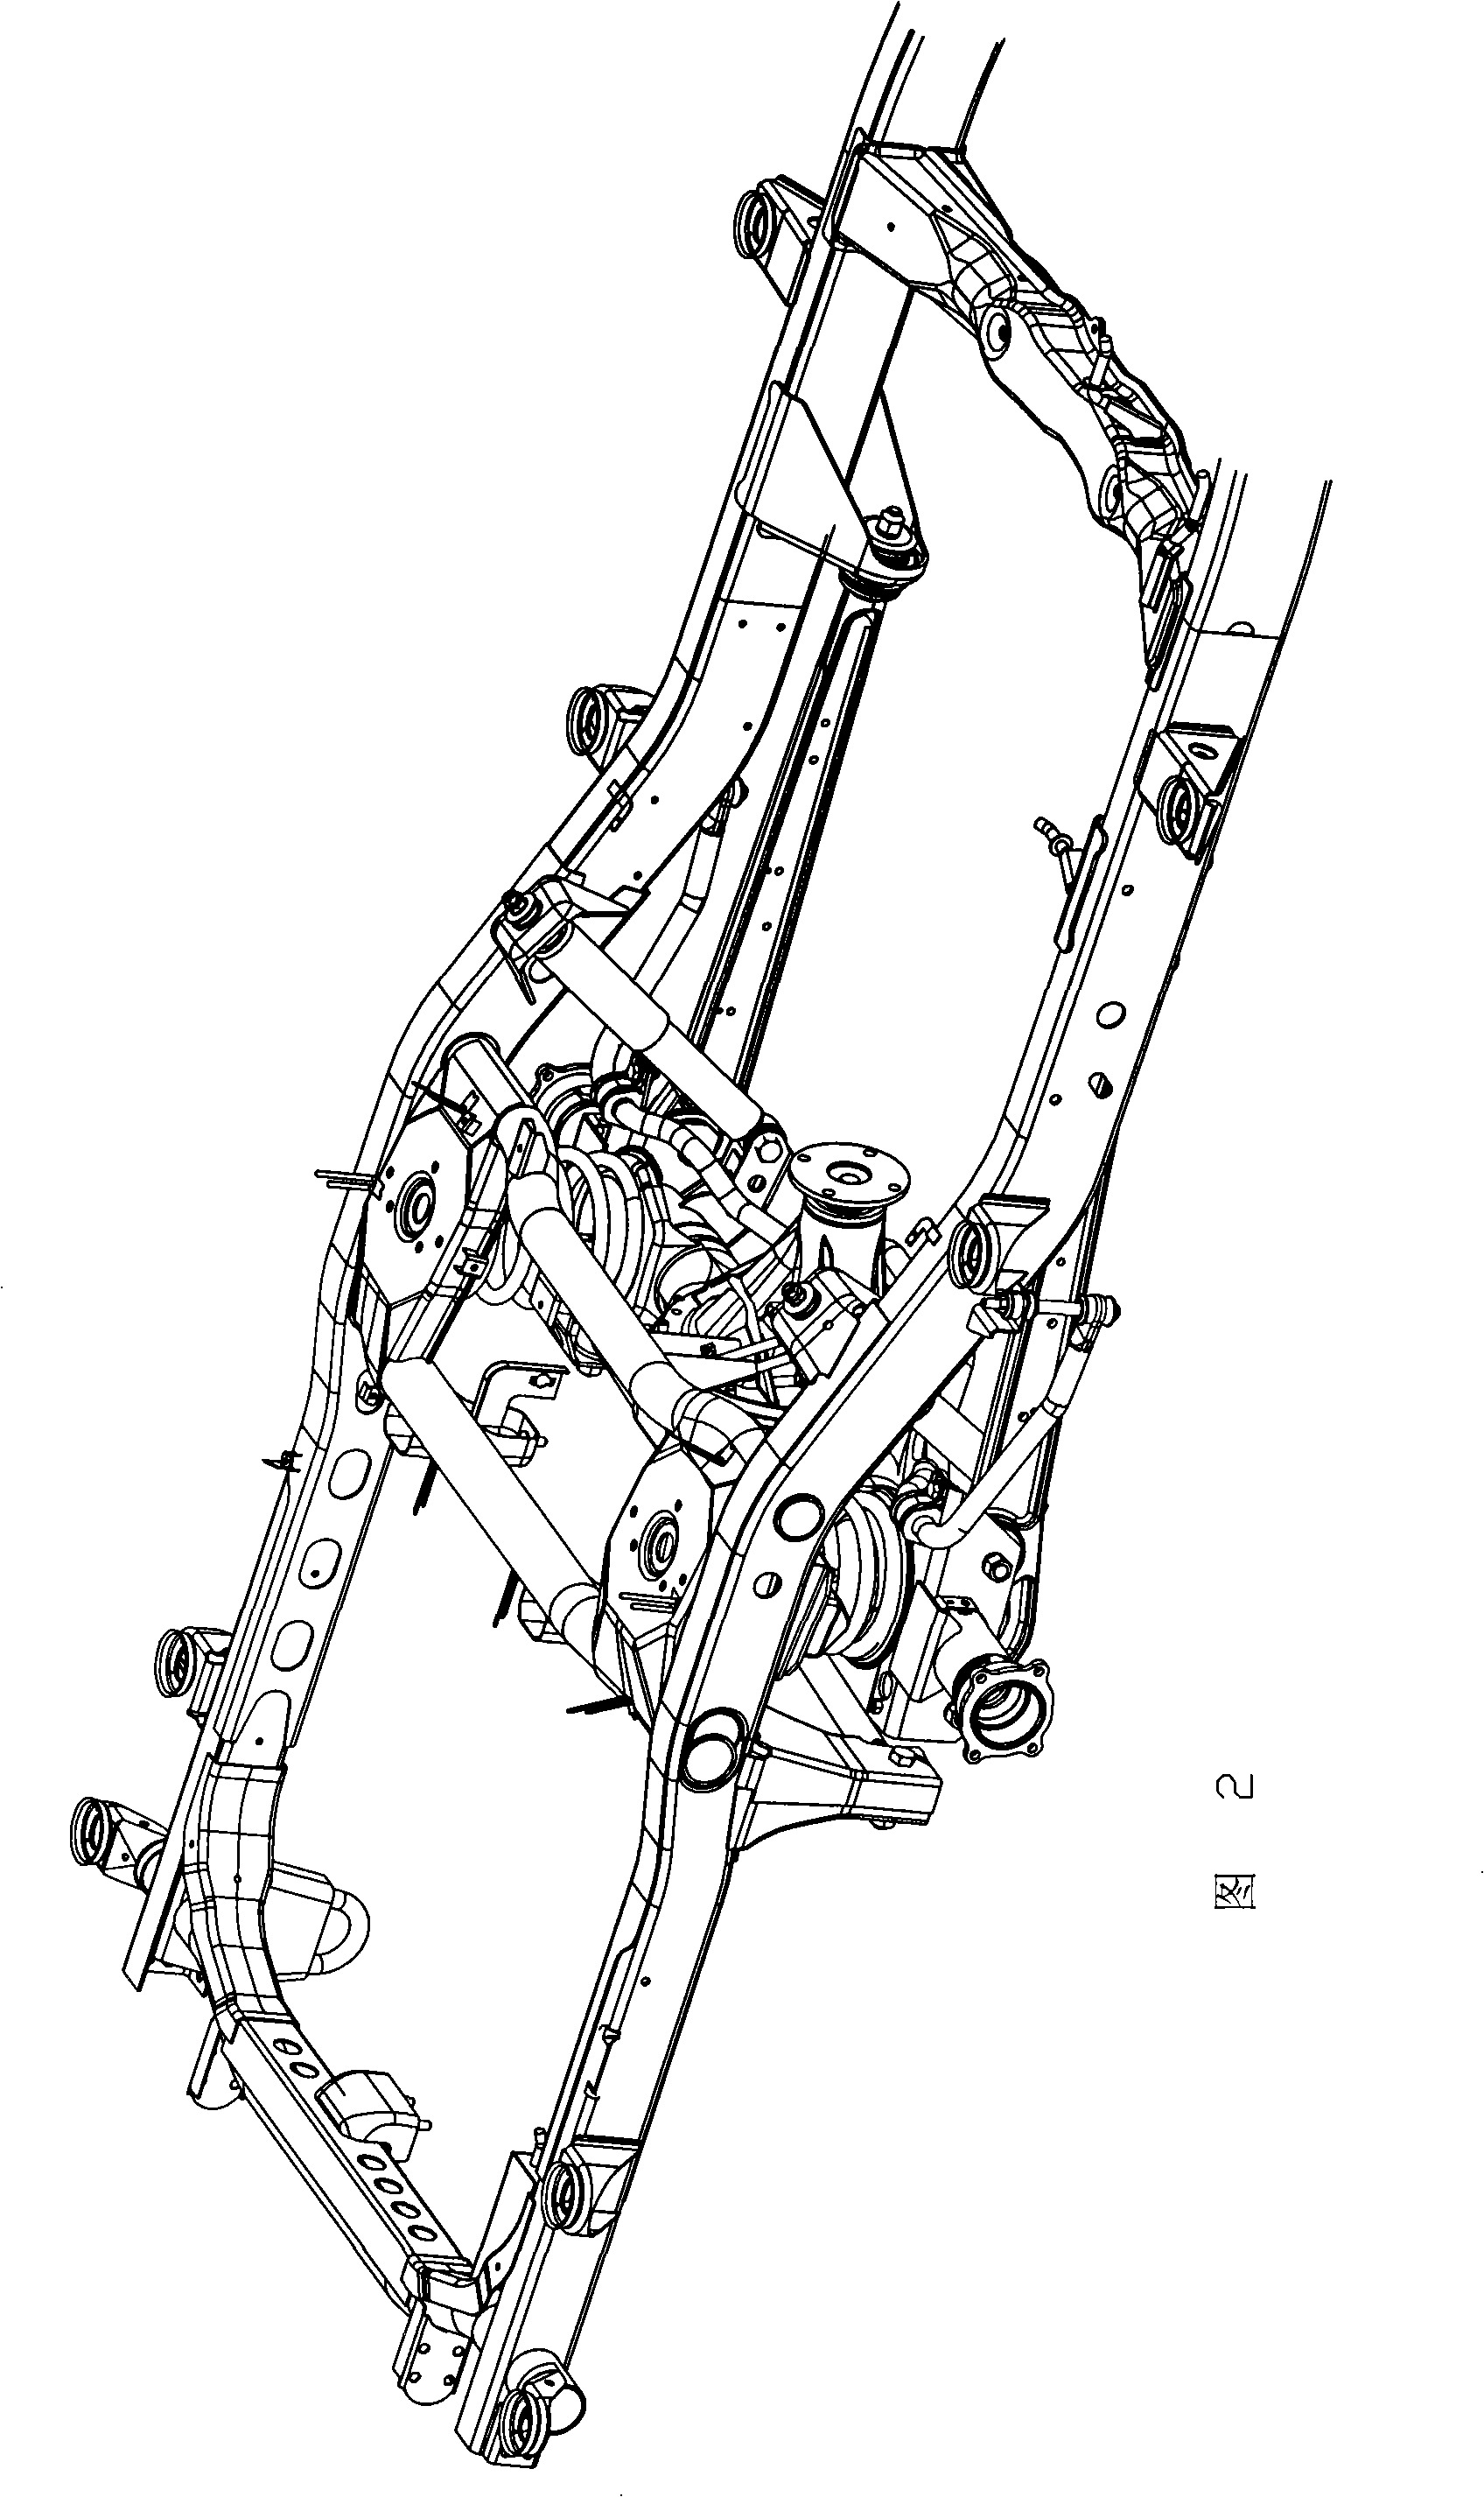 Rear suspension device of sport utility vehicle